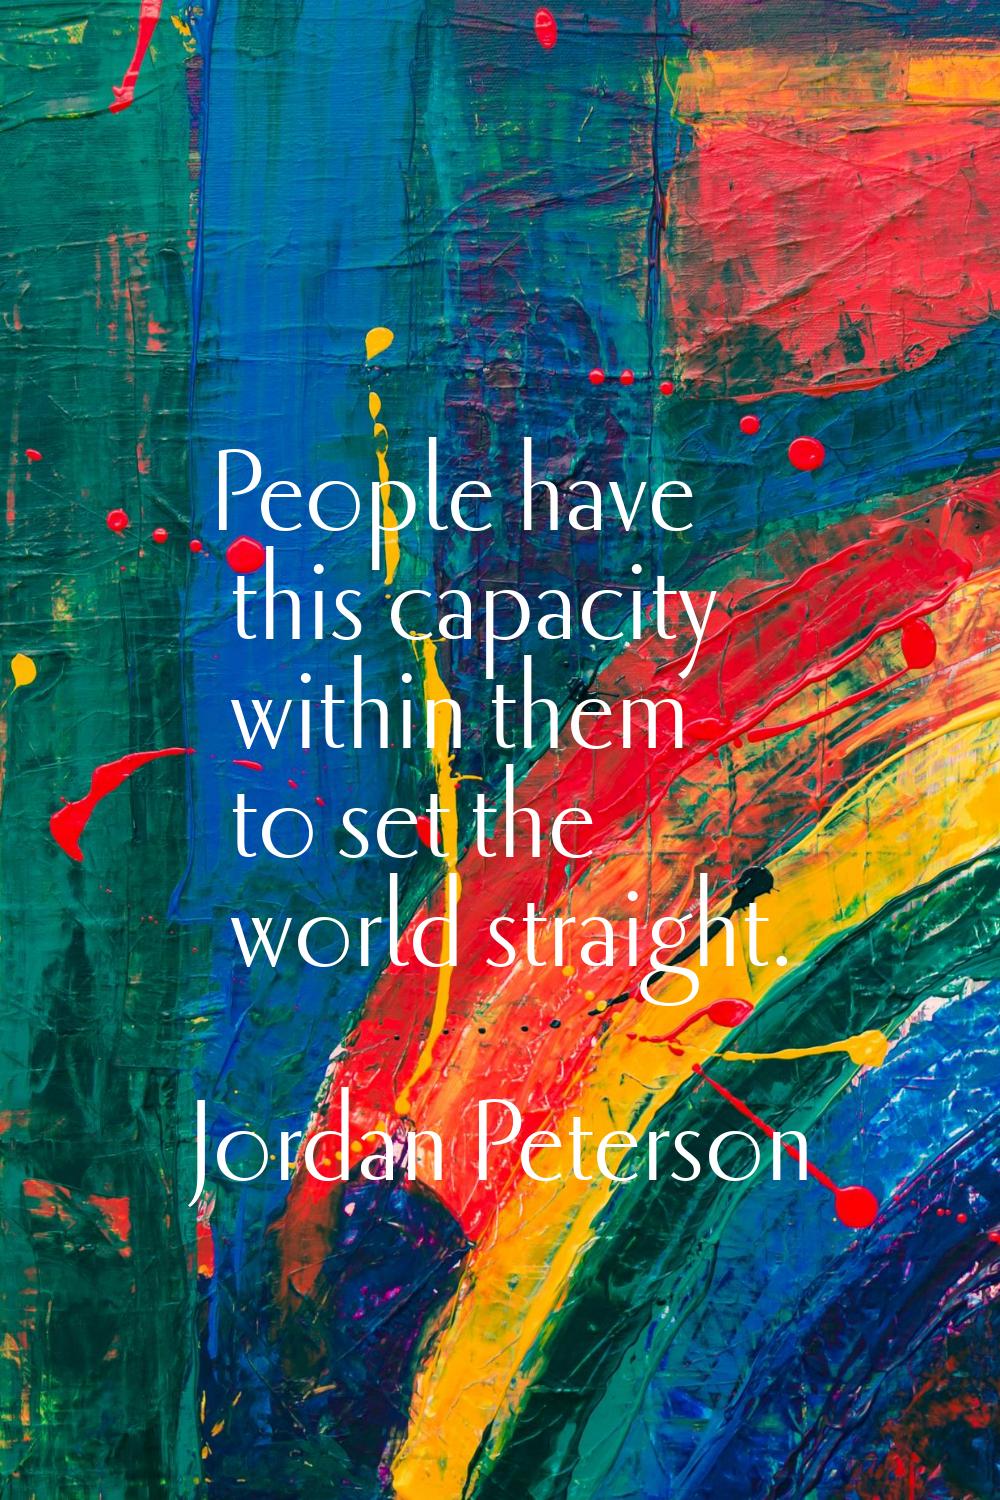 People have this capacity within them to set the world straight.